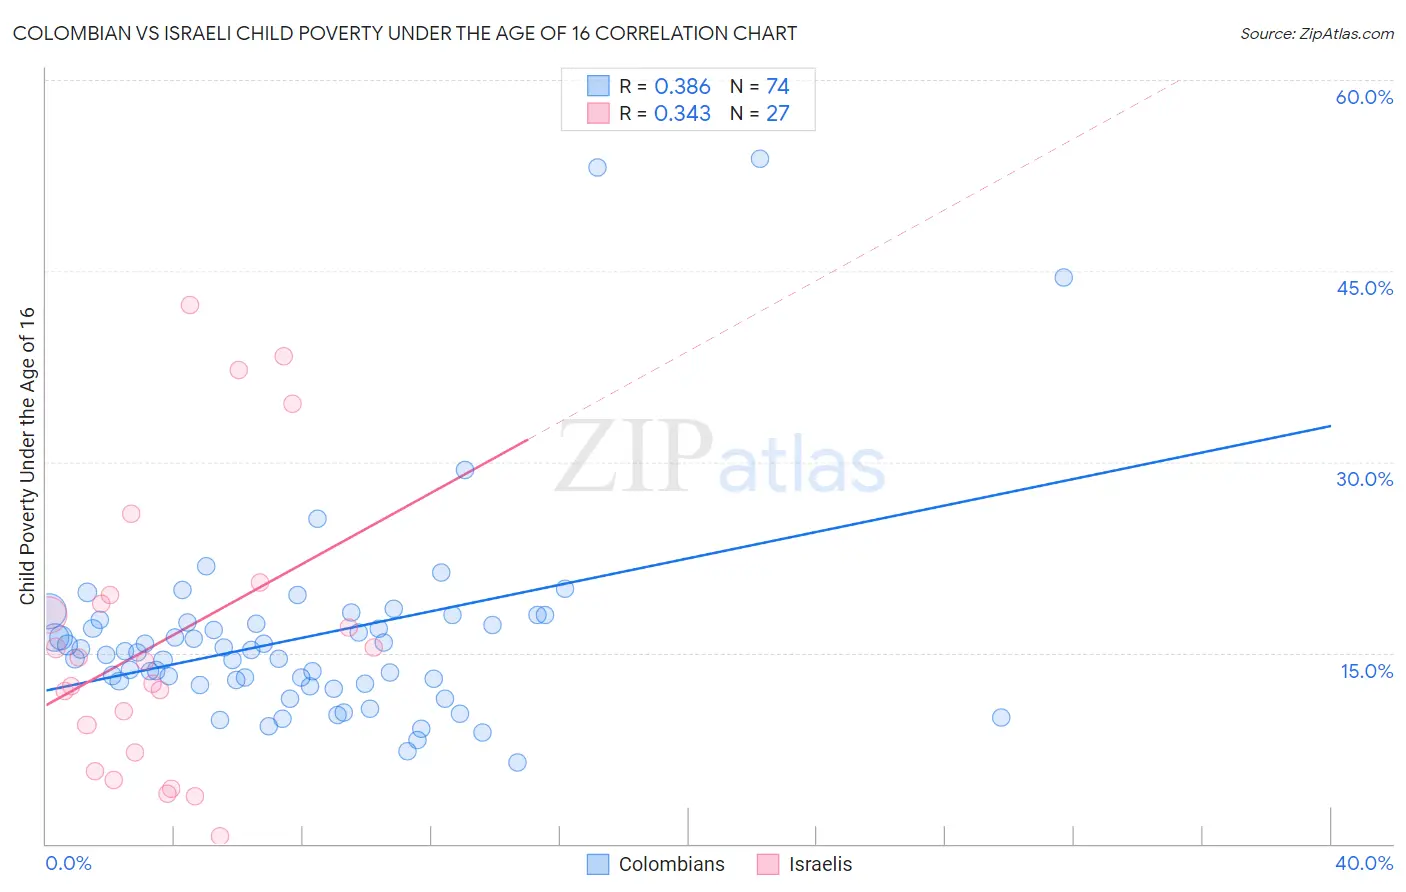 Colombian vs Israeli Child Poverty Under the Age of 16